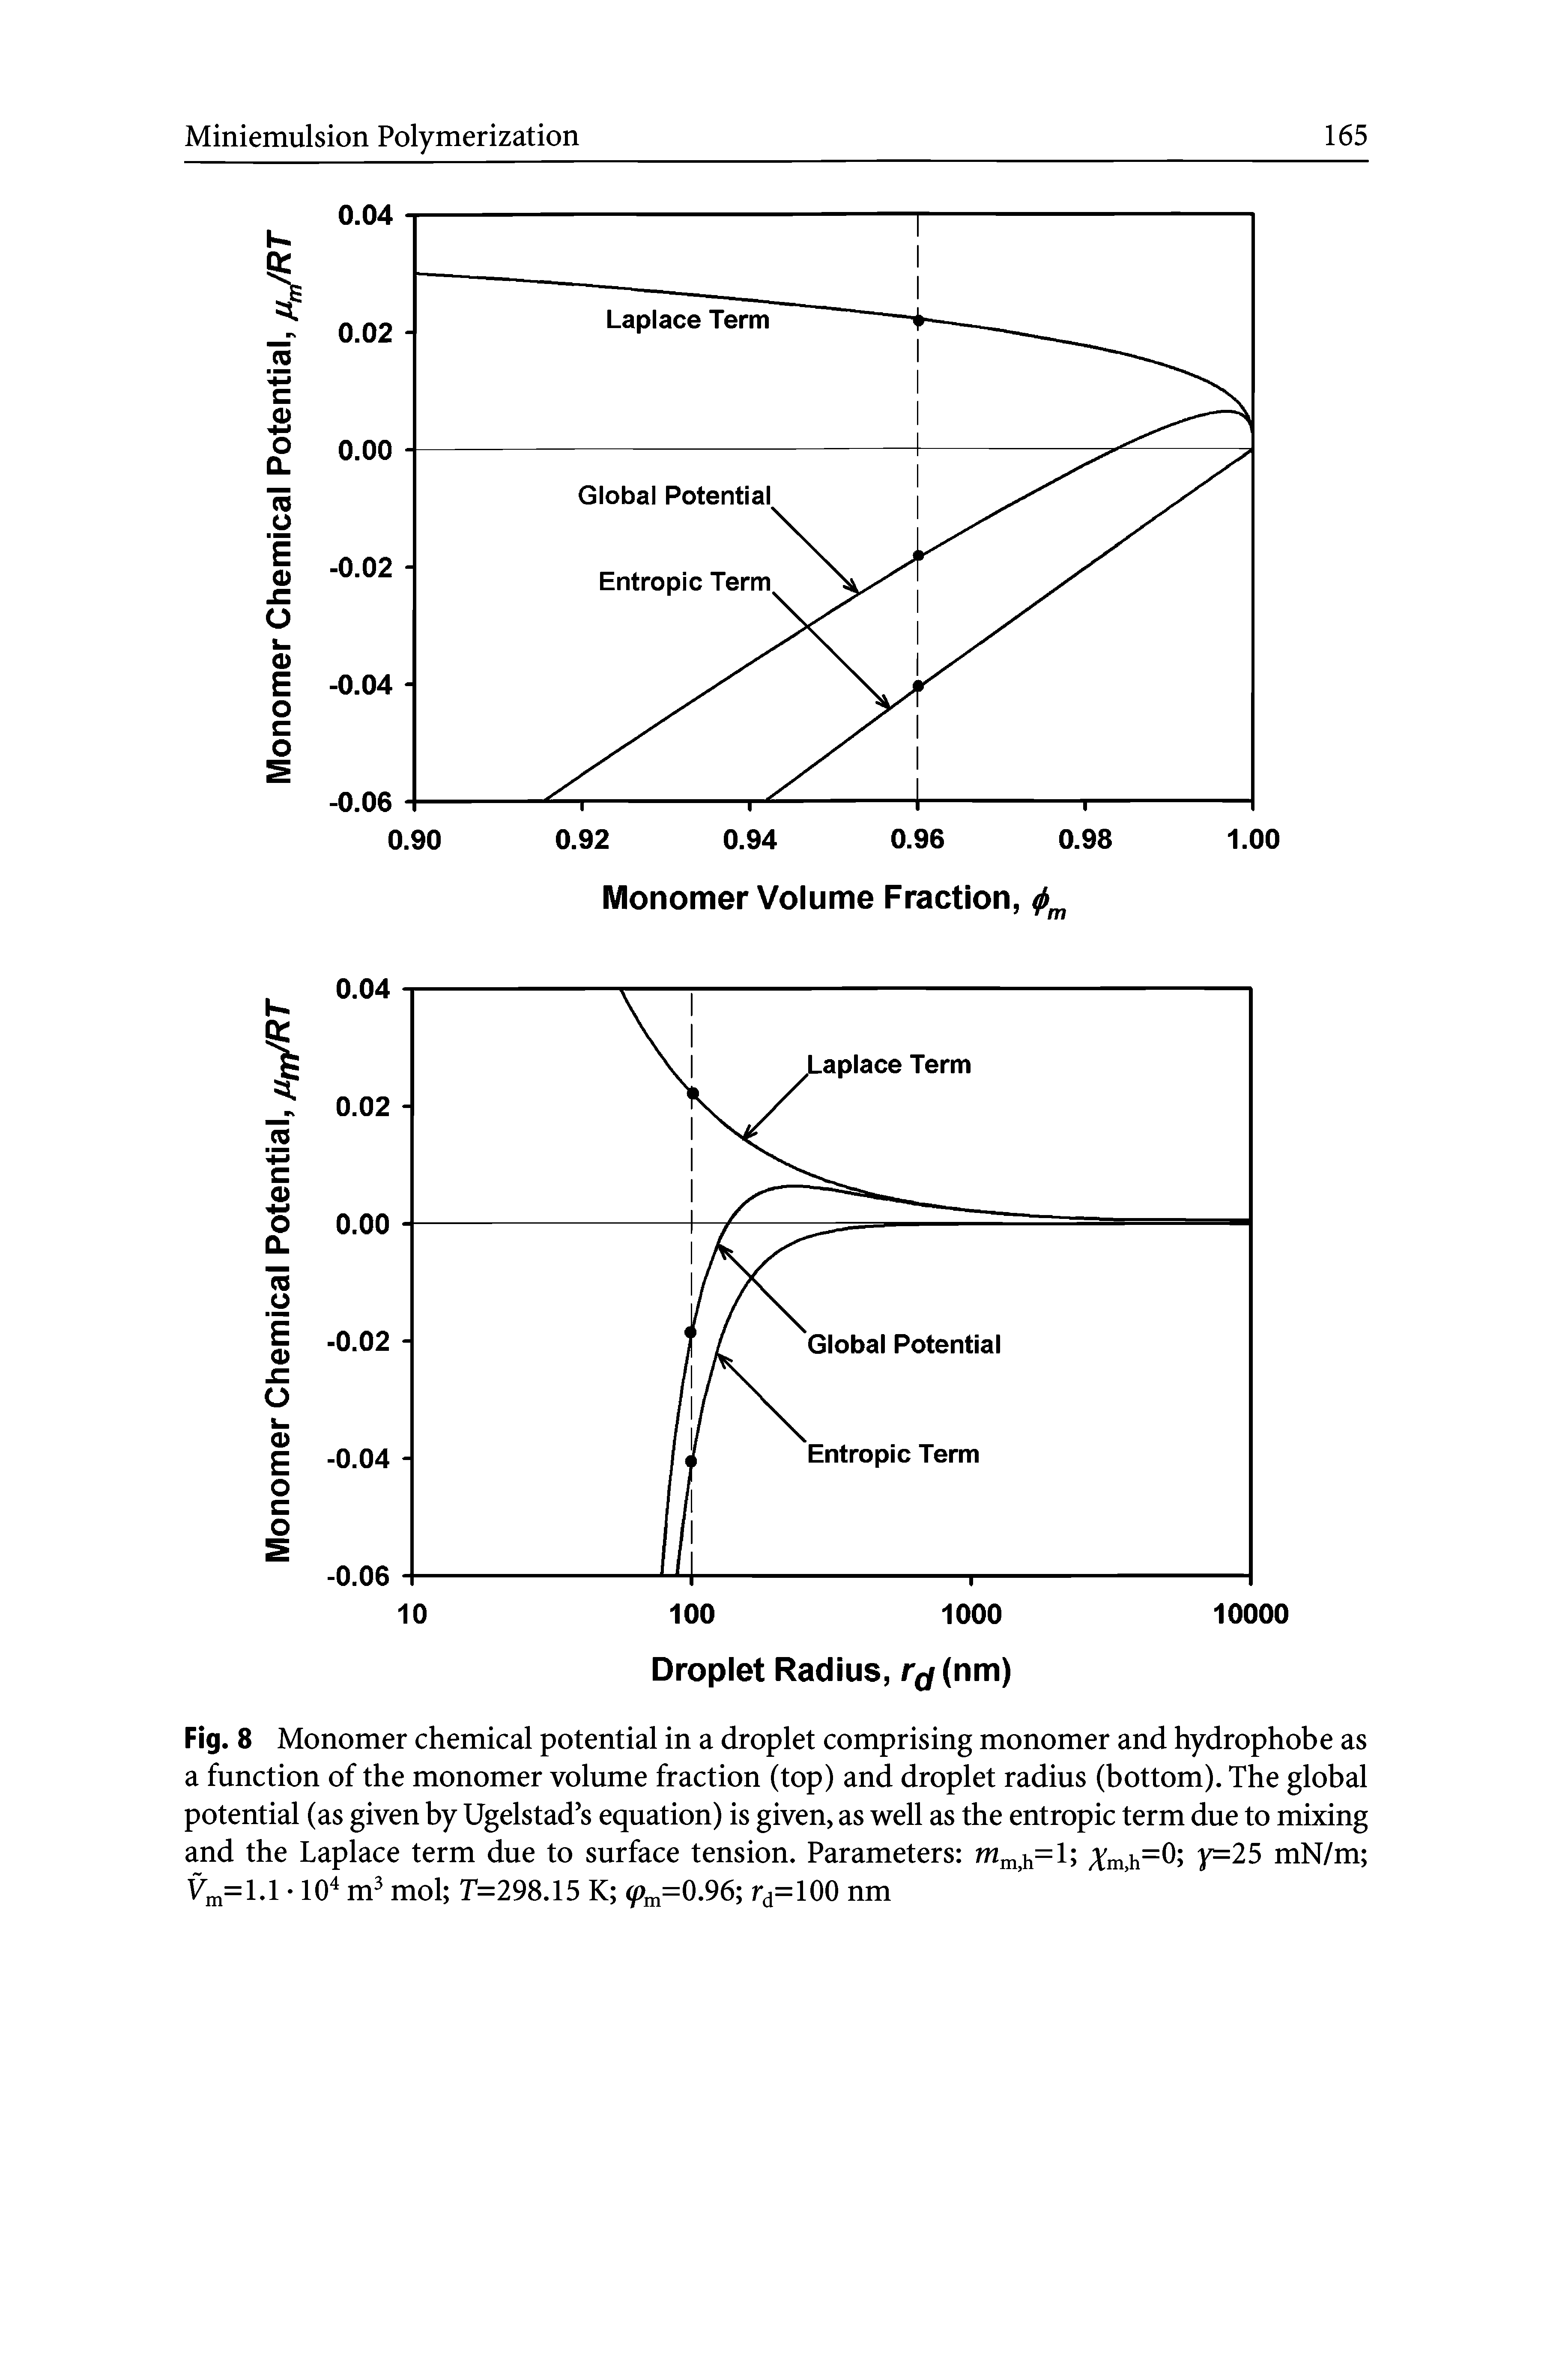 Fig. 8 Monomer chemical potential in a droplet comprising monomer and hydrophobe as a function of the monomer volume fraction (top) and droplet radius (bottom). The global potential (as given by Ugelstad s equation) is given, as well as the entropic term due to mixing and the Laplace term due to surface tension. Parameters m Y=l Vm,h=0 y=25 mN/m Vjn=l-1 10 m mol T=298.15 K (p =0,96 r =100 nm...